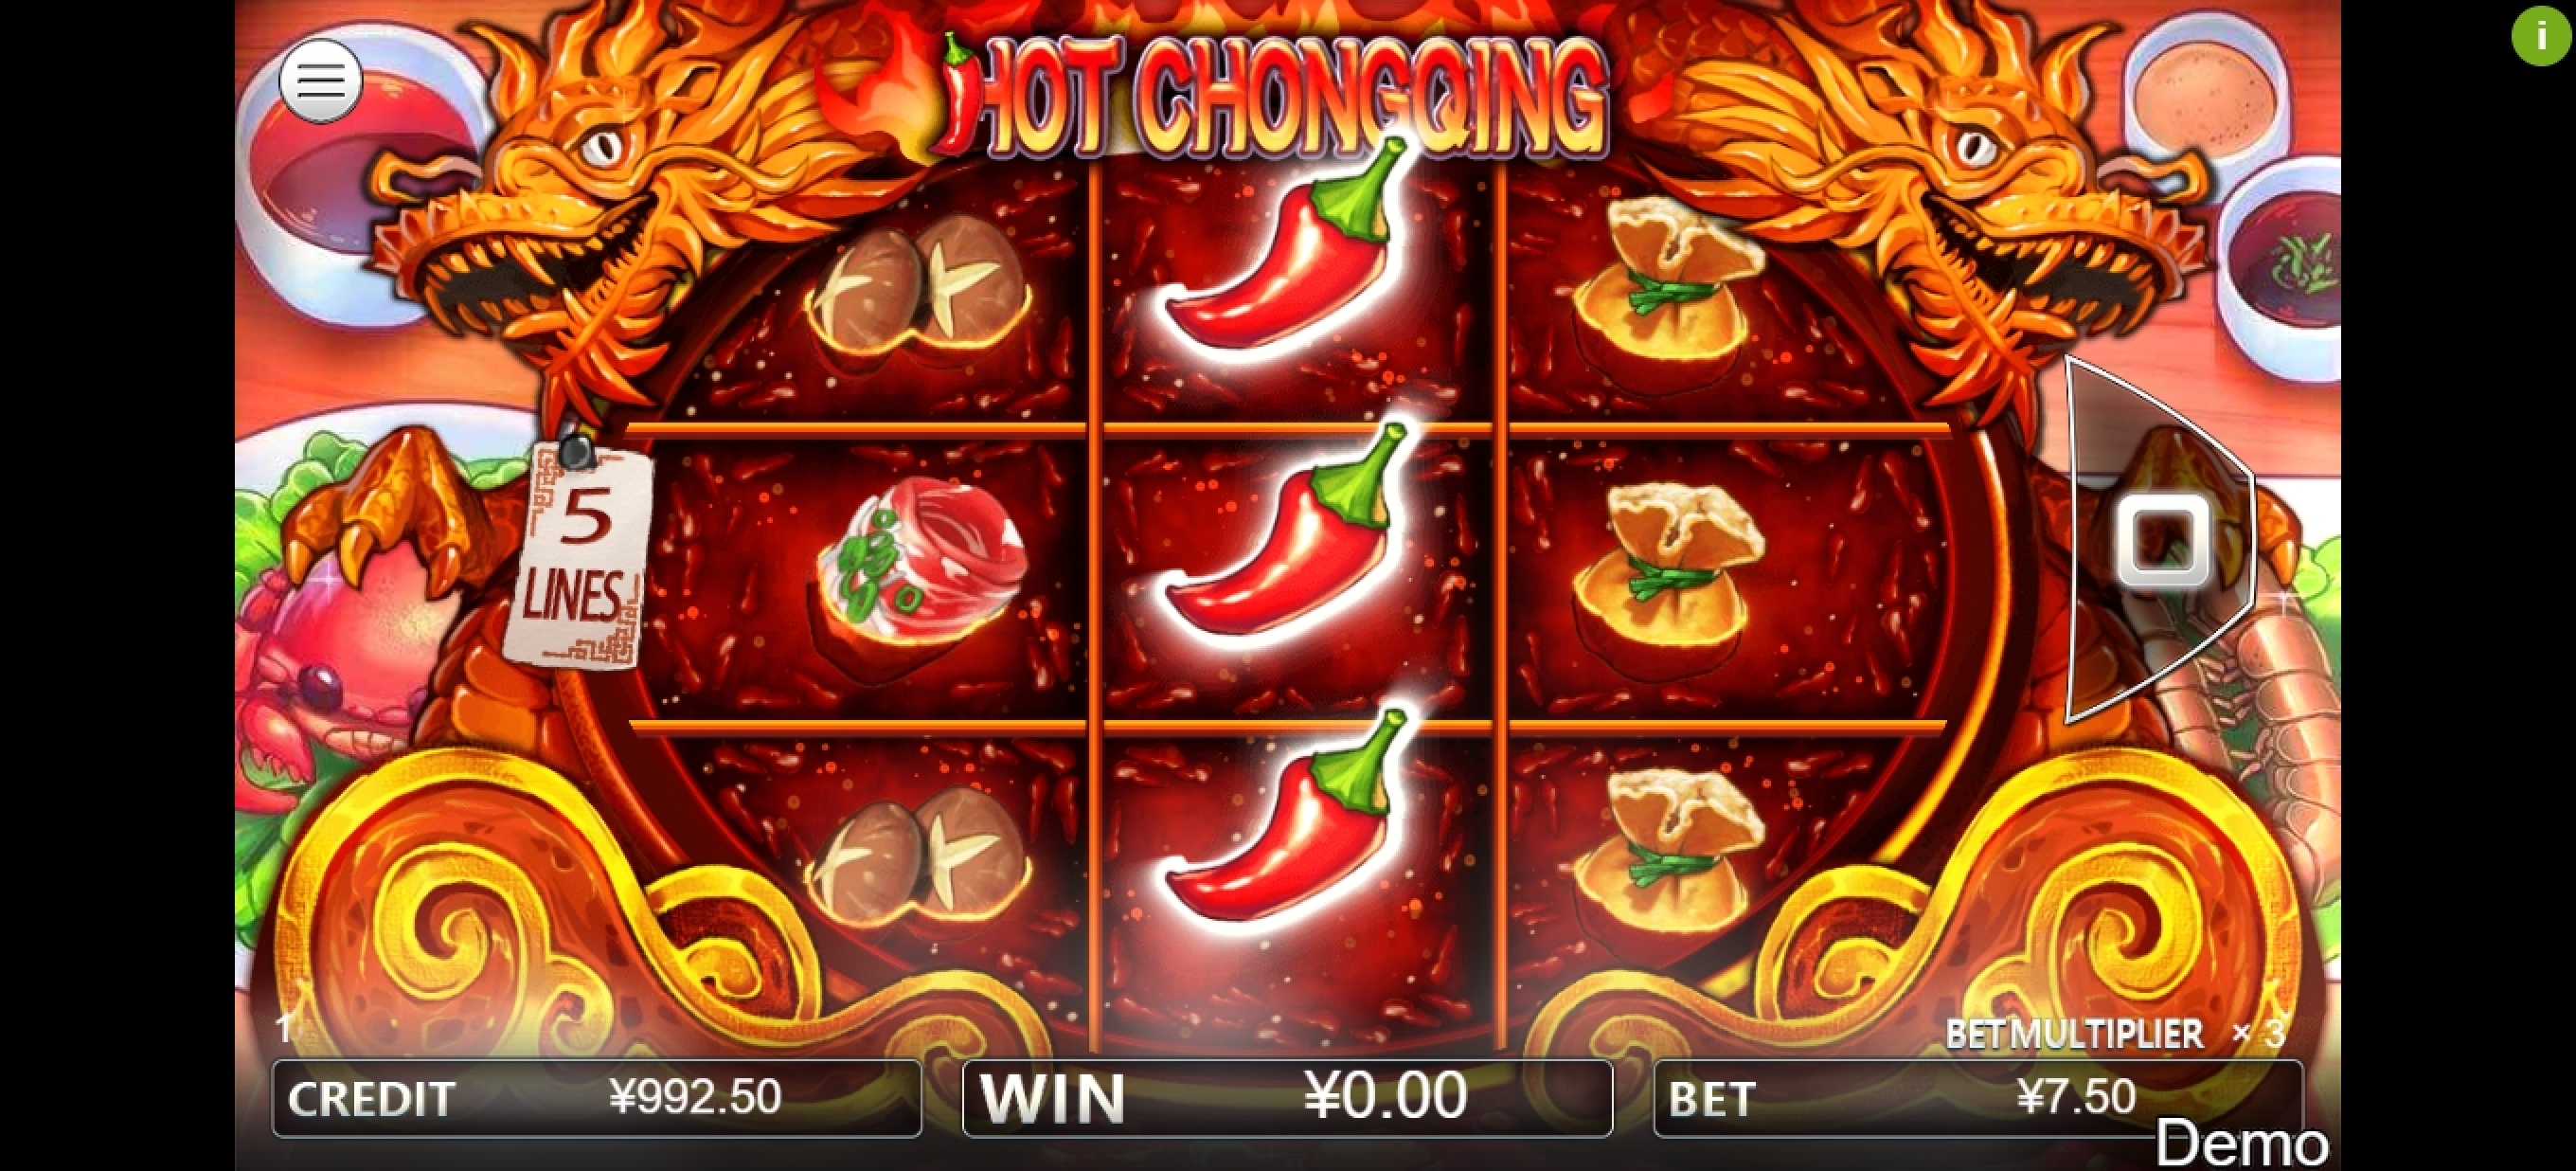 Win Money in Hot Chongqing Free Slot Game by Iconic Gaming